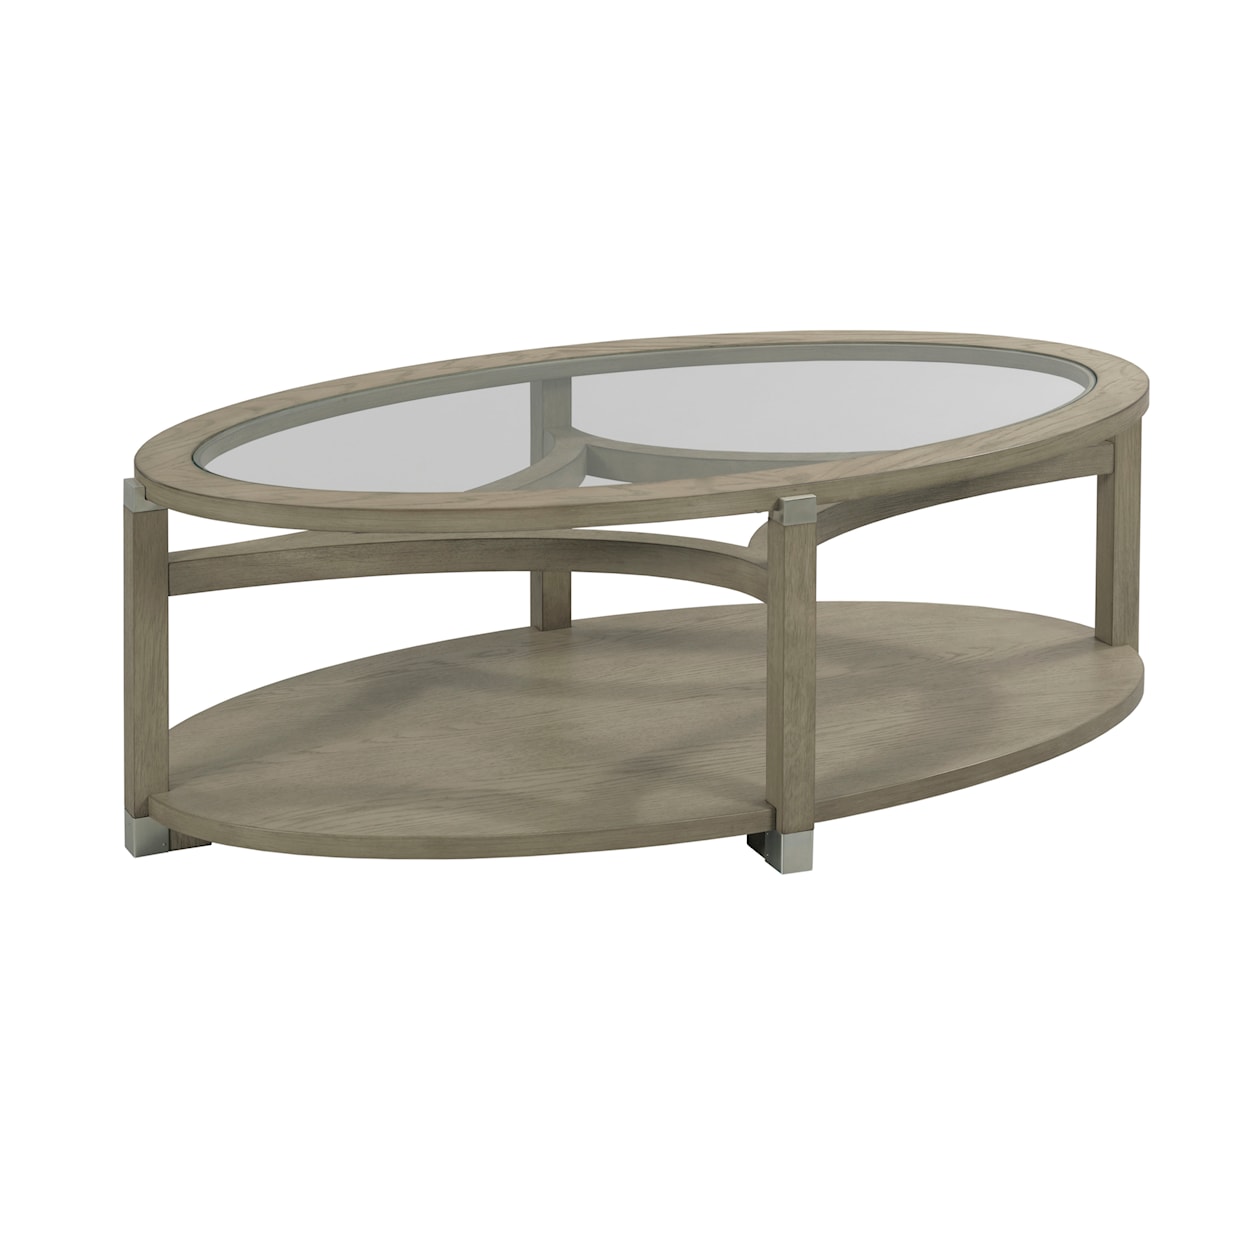 Hammary Solstice Oval Coffee Table